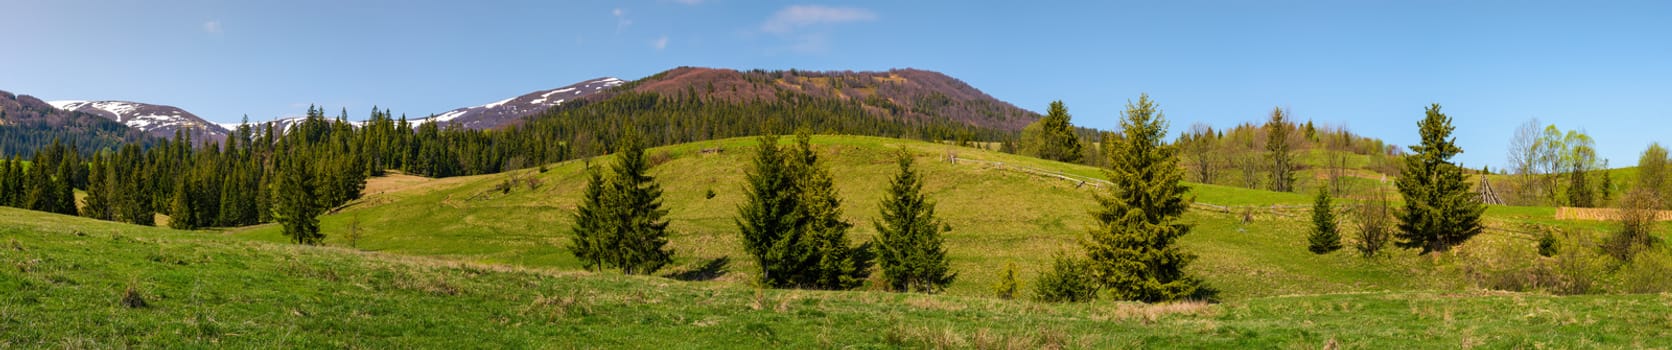 panorama of mountainous landscape in springtime. lovely scenery with spruce forest on grassy slopes. mountain ridge with snowy tops in the distance